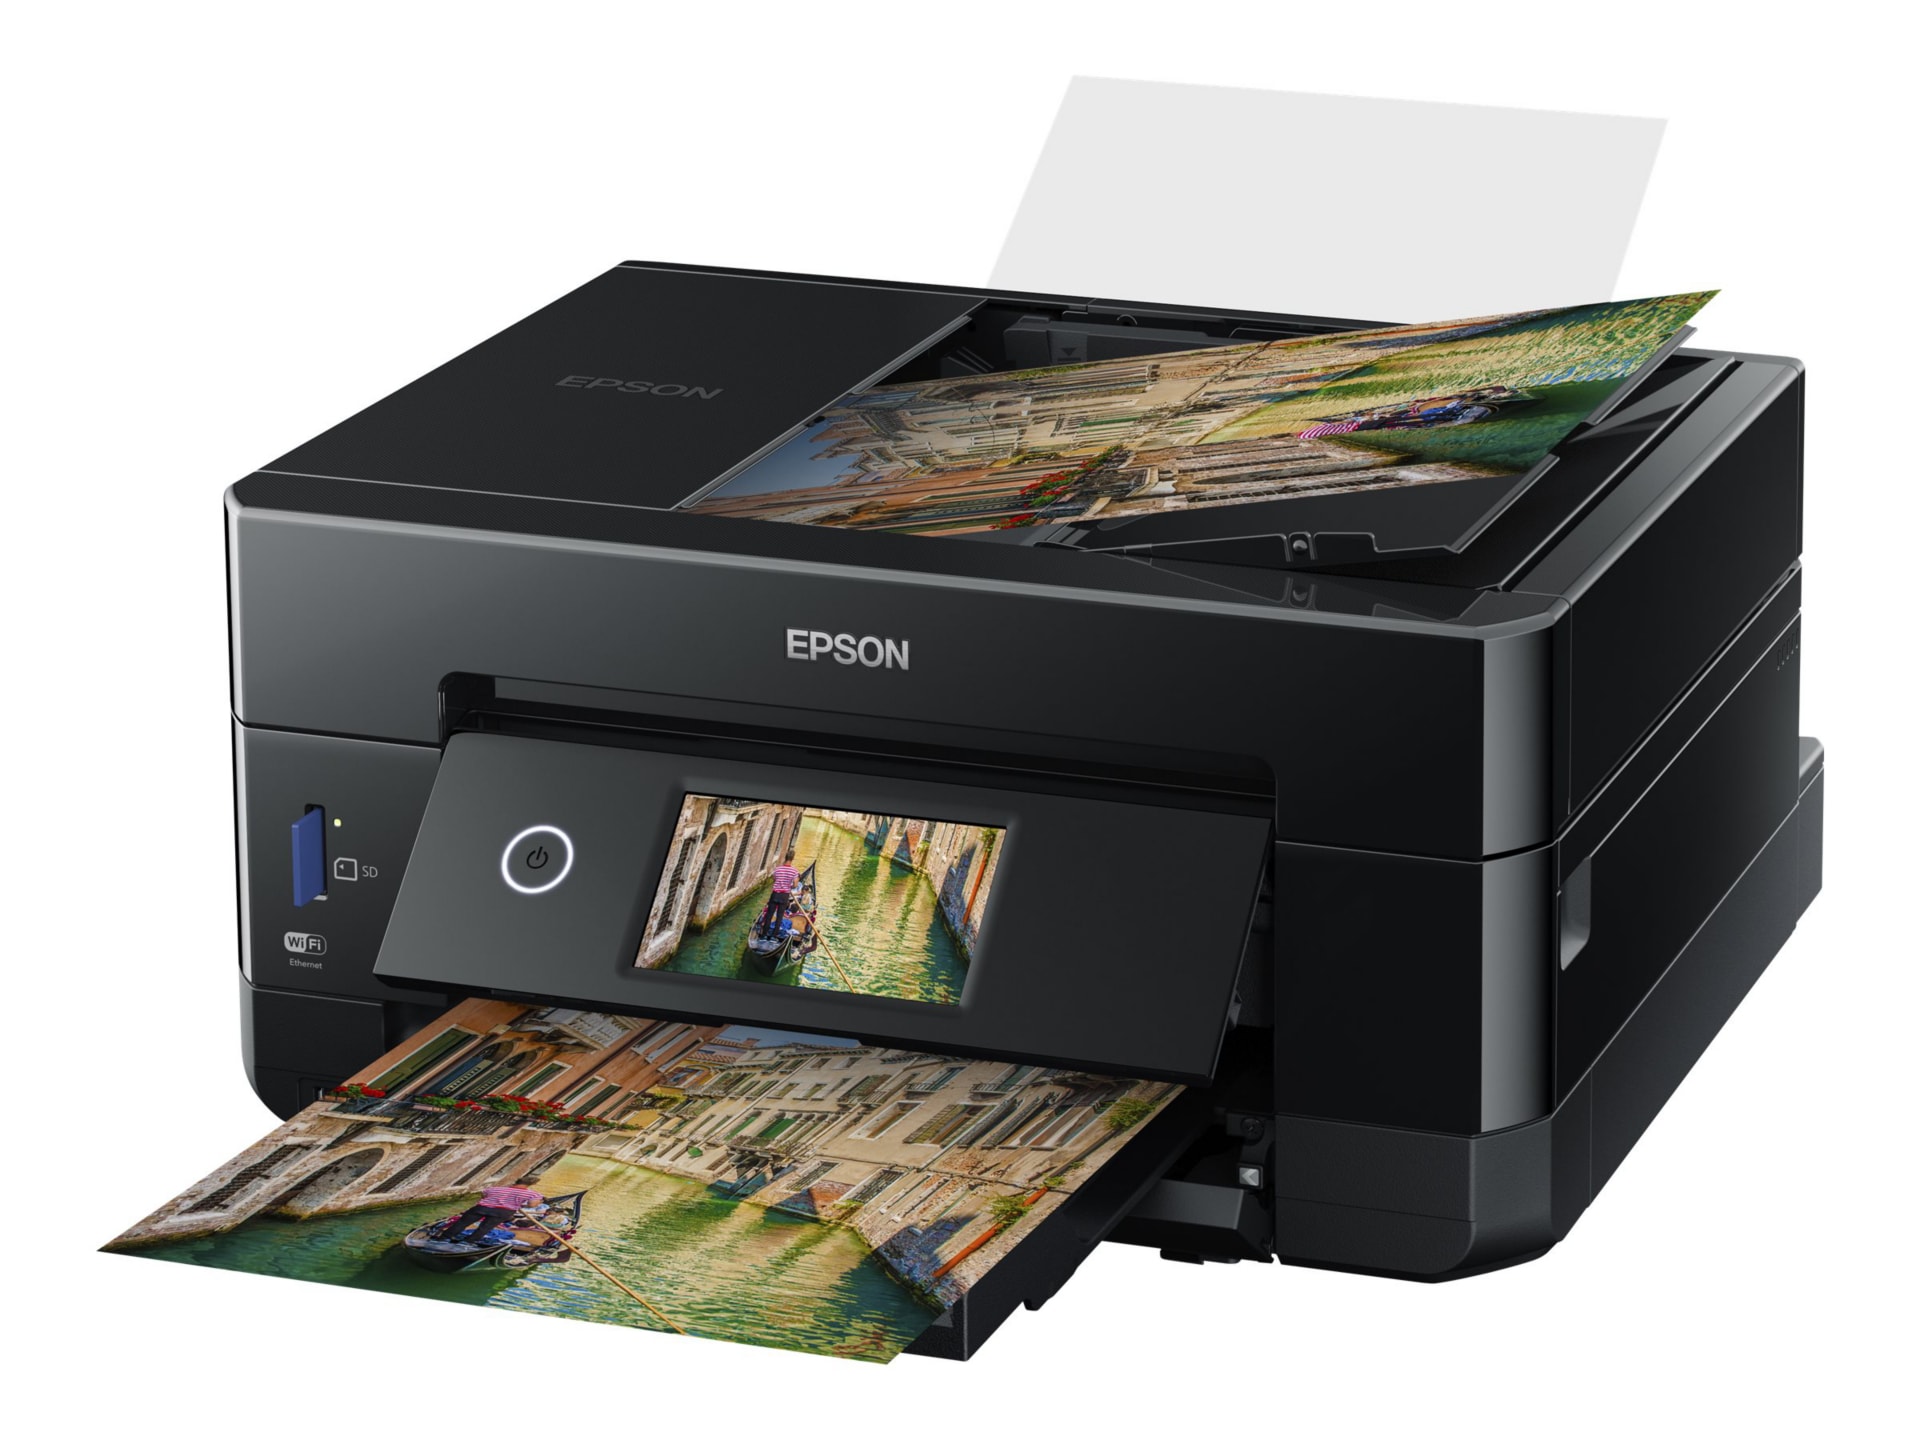 Epson Expression Premium XP-7100 Small-in-One - multifunction printer - color